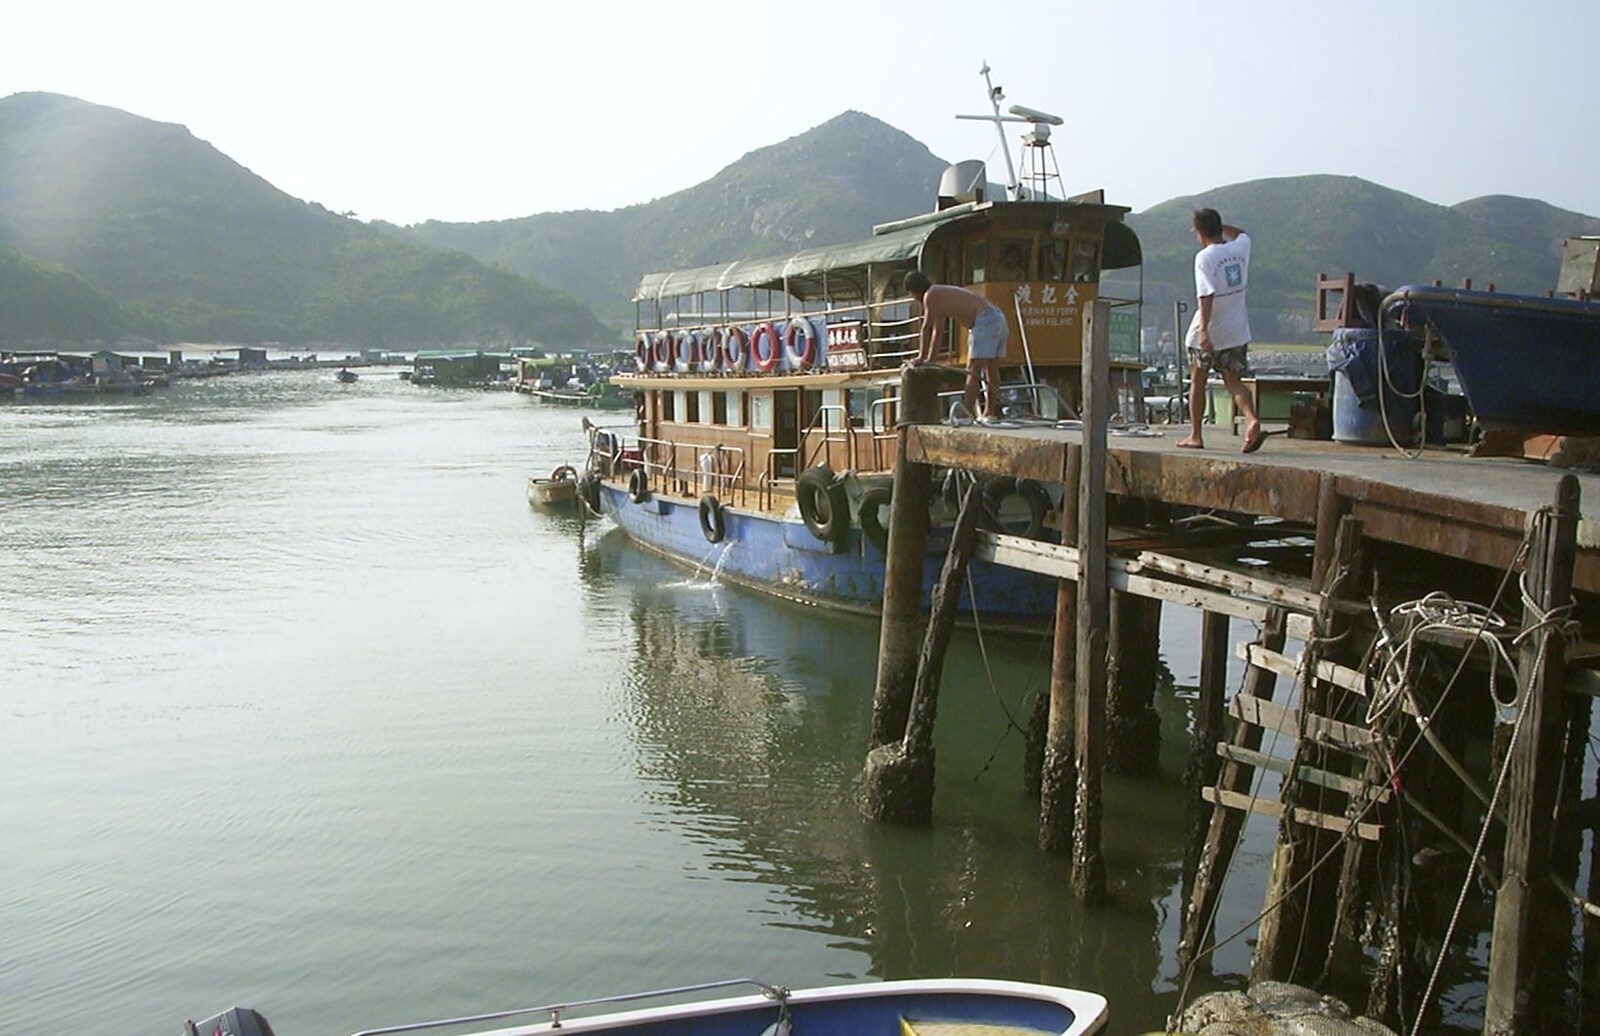 Lamma Island, Hong Kong, China - 20th August 2001: The ferry at the pier